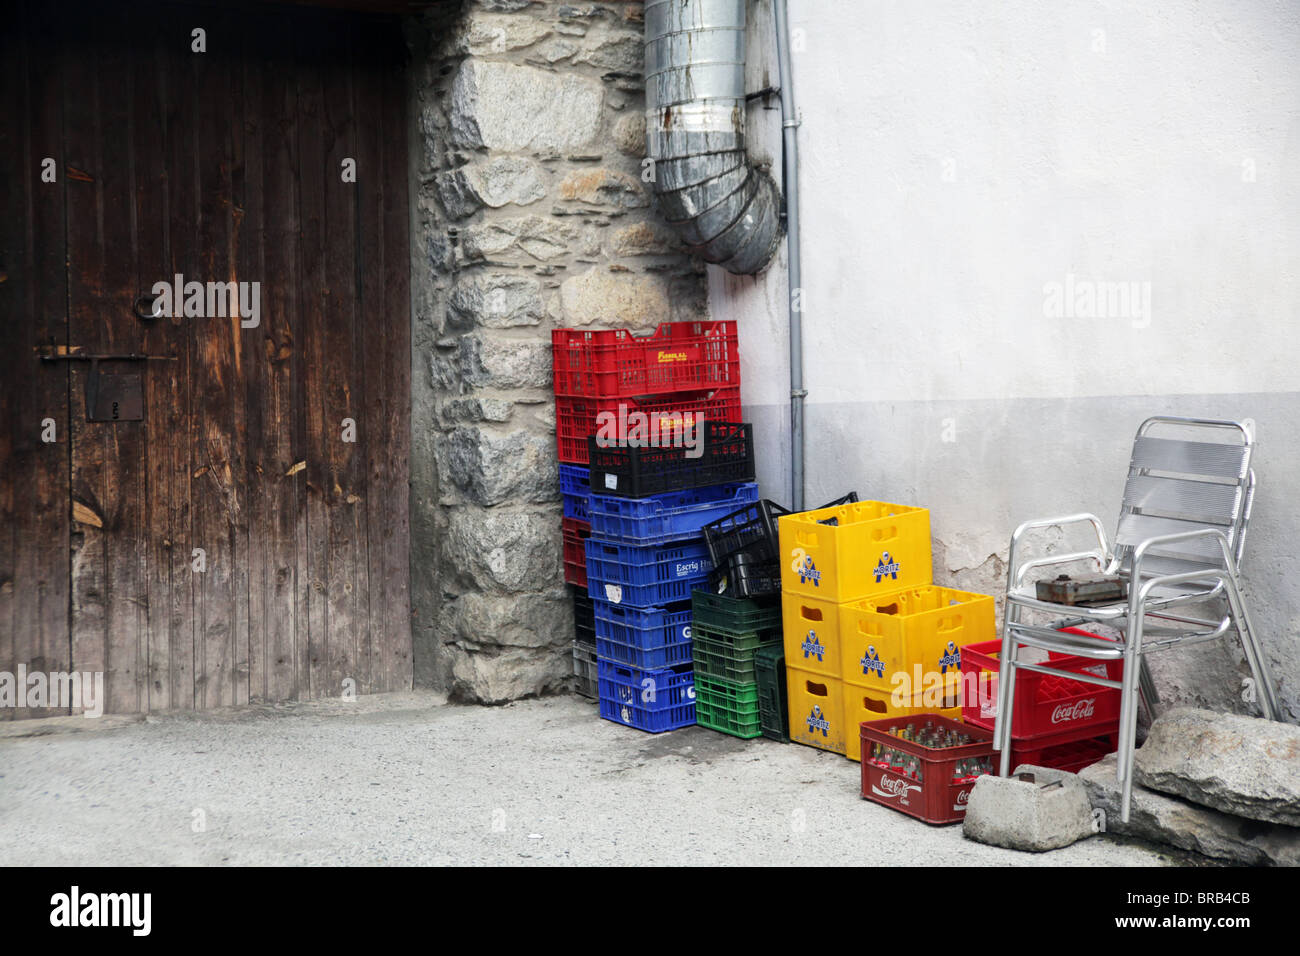 Old coca-cola crates outside a dusty wooden restaurant kitchen back door on a run-down backstreet Stock Photo